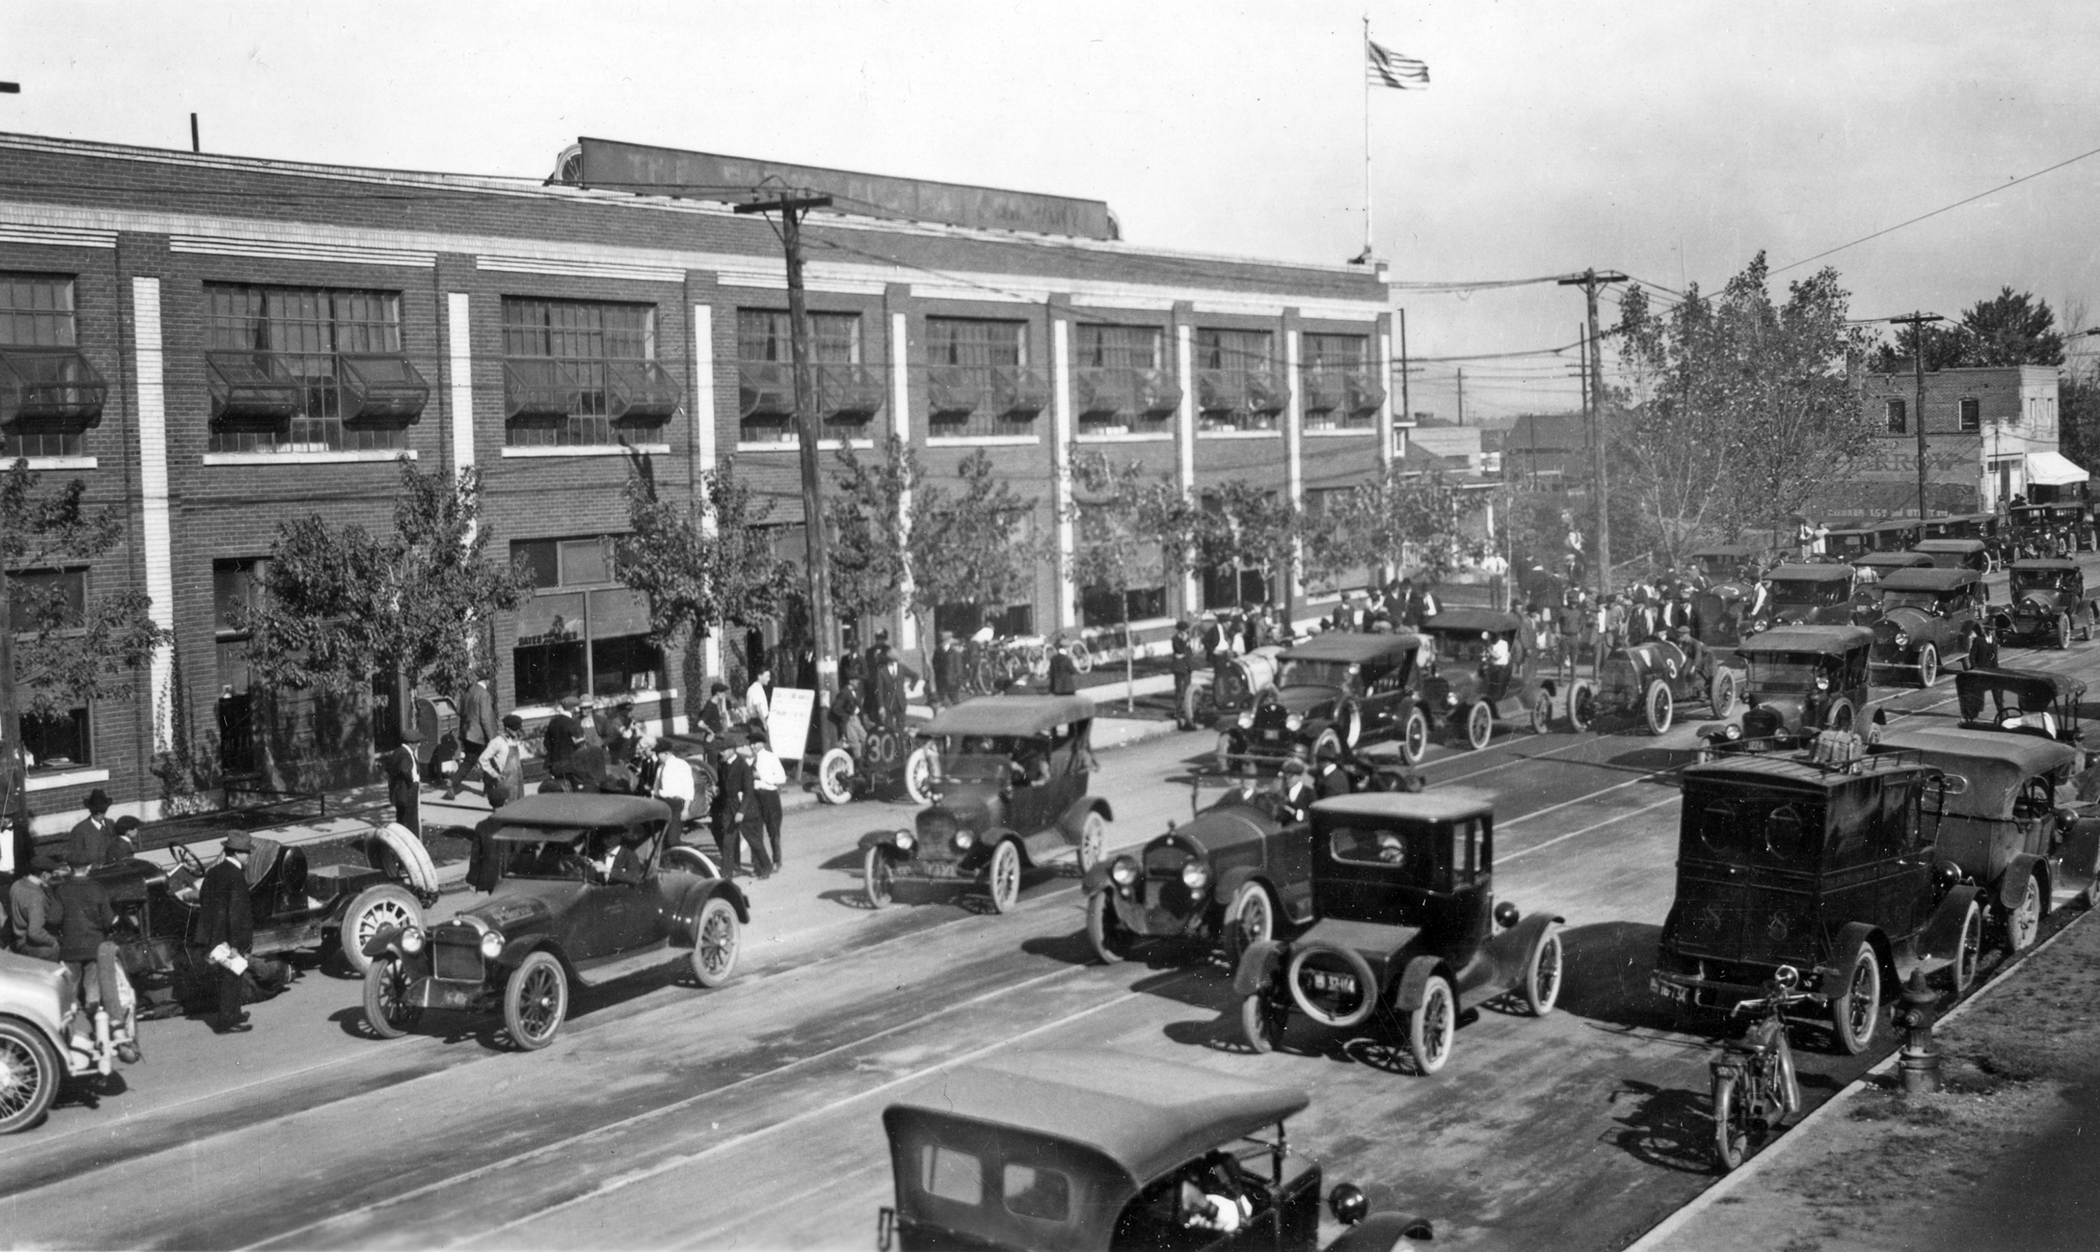 Drivers navigate Denver traffic in the early 1920s